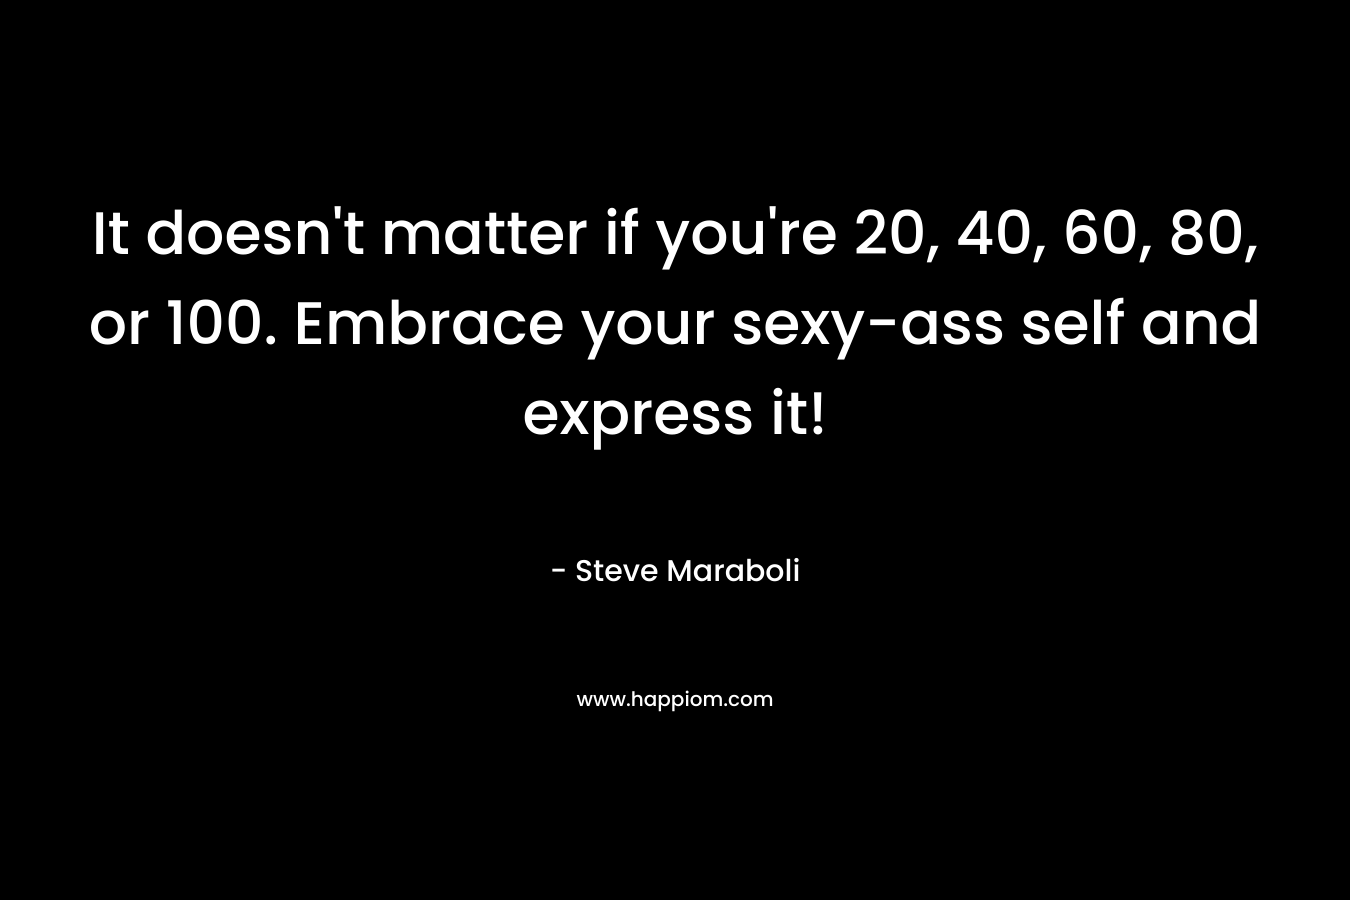 It doesn’t matter if you’re 20, 40, 60, 80, or 100. Embrace your sexy-ass self and express it! – Steve Maraboli